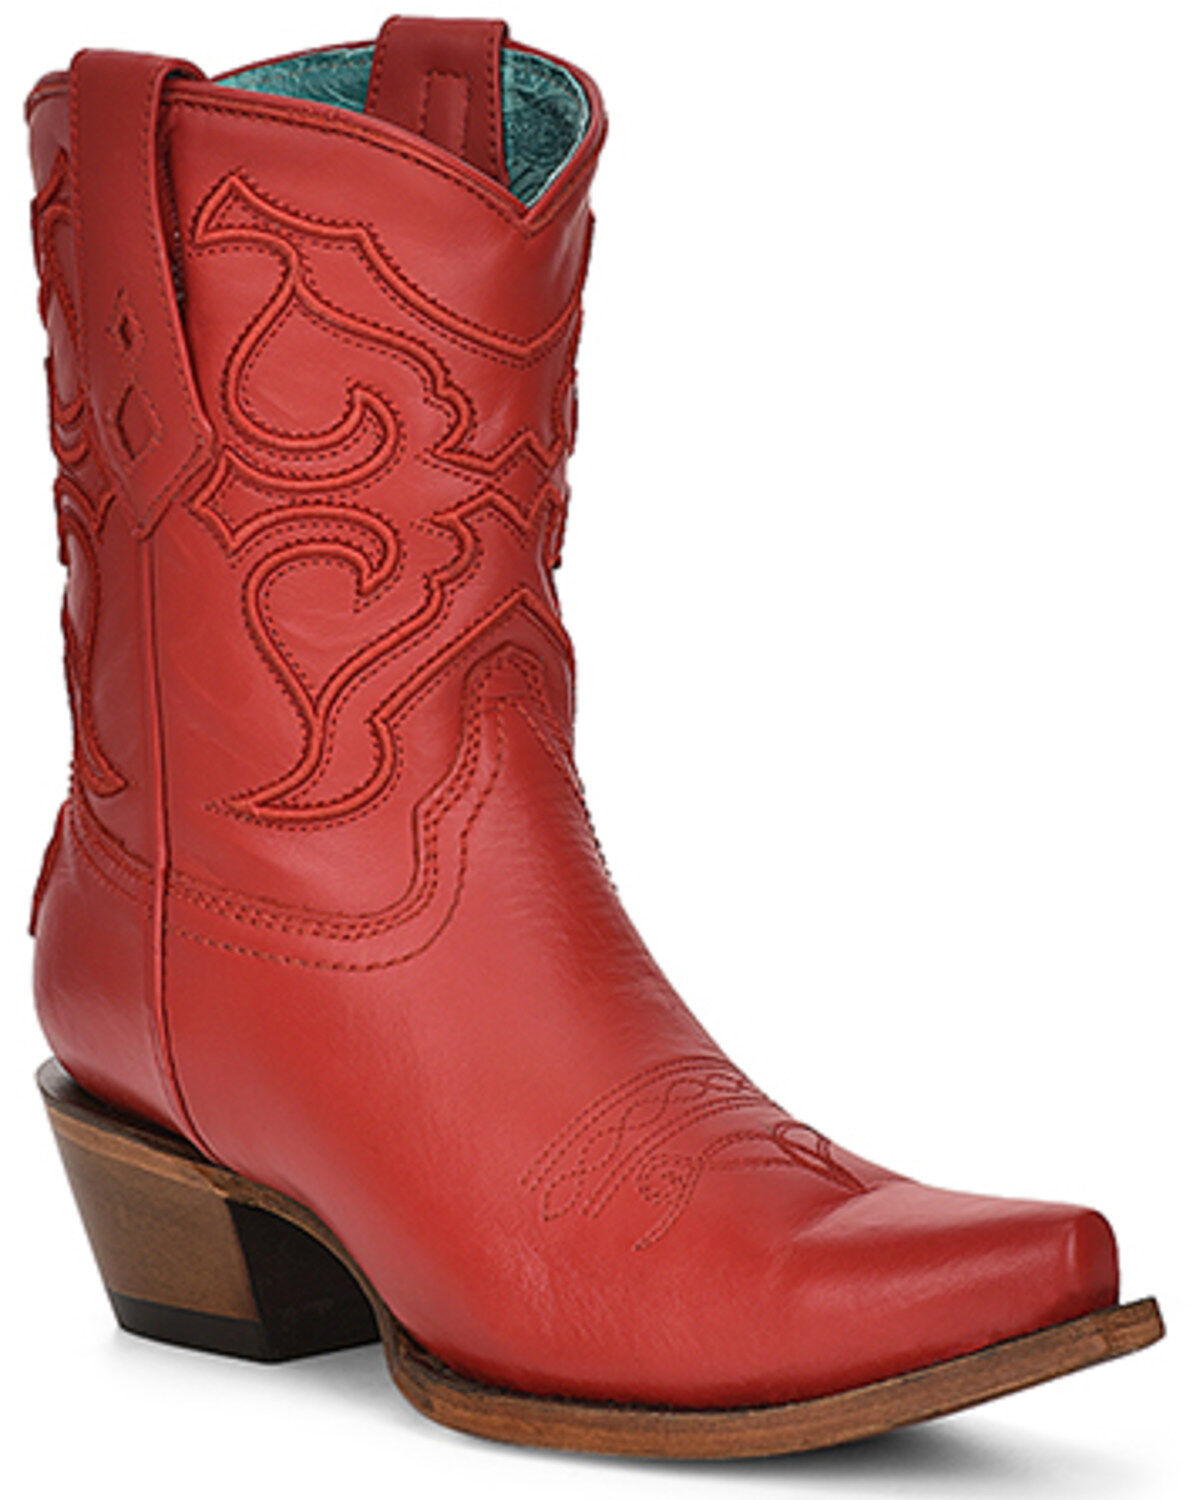 Primary image for Corral Women's Embroidered Ankle Snip Toe Western Boots